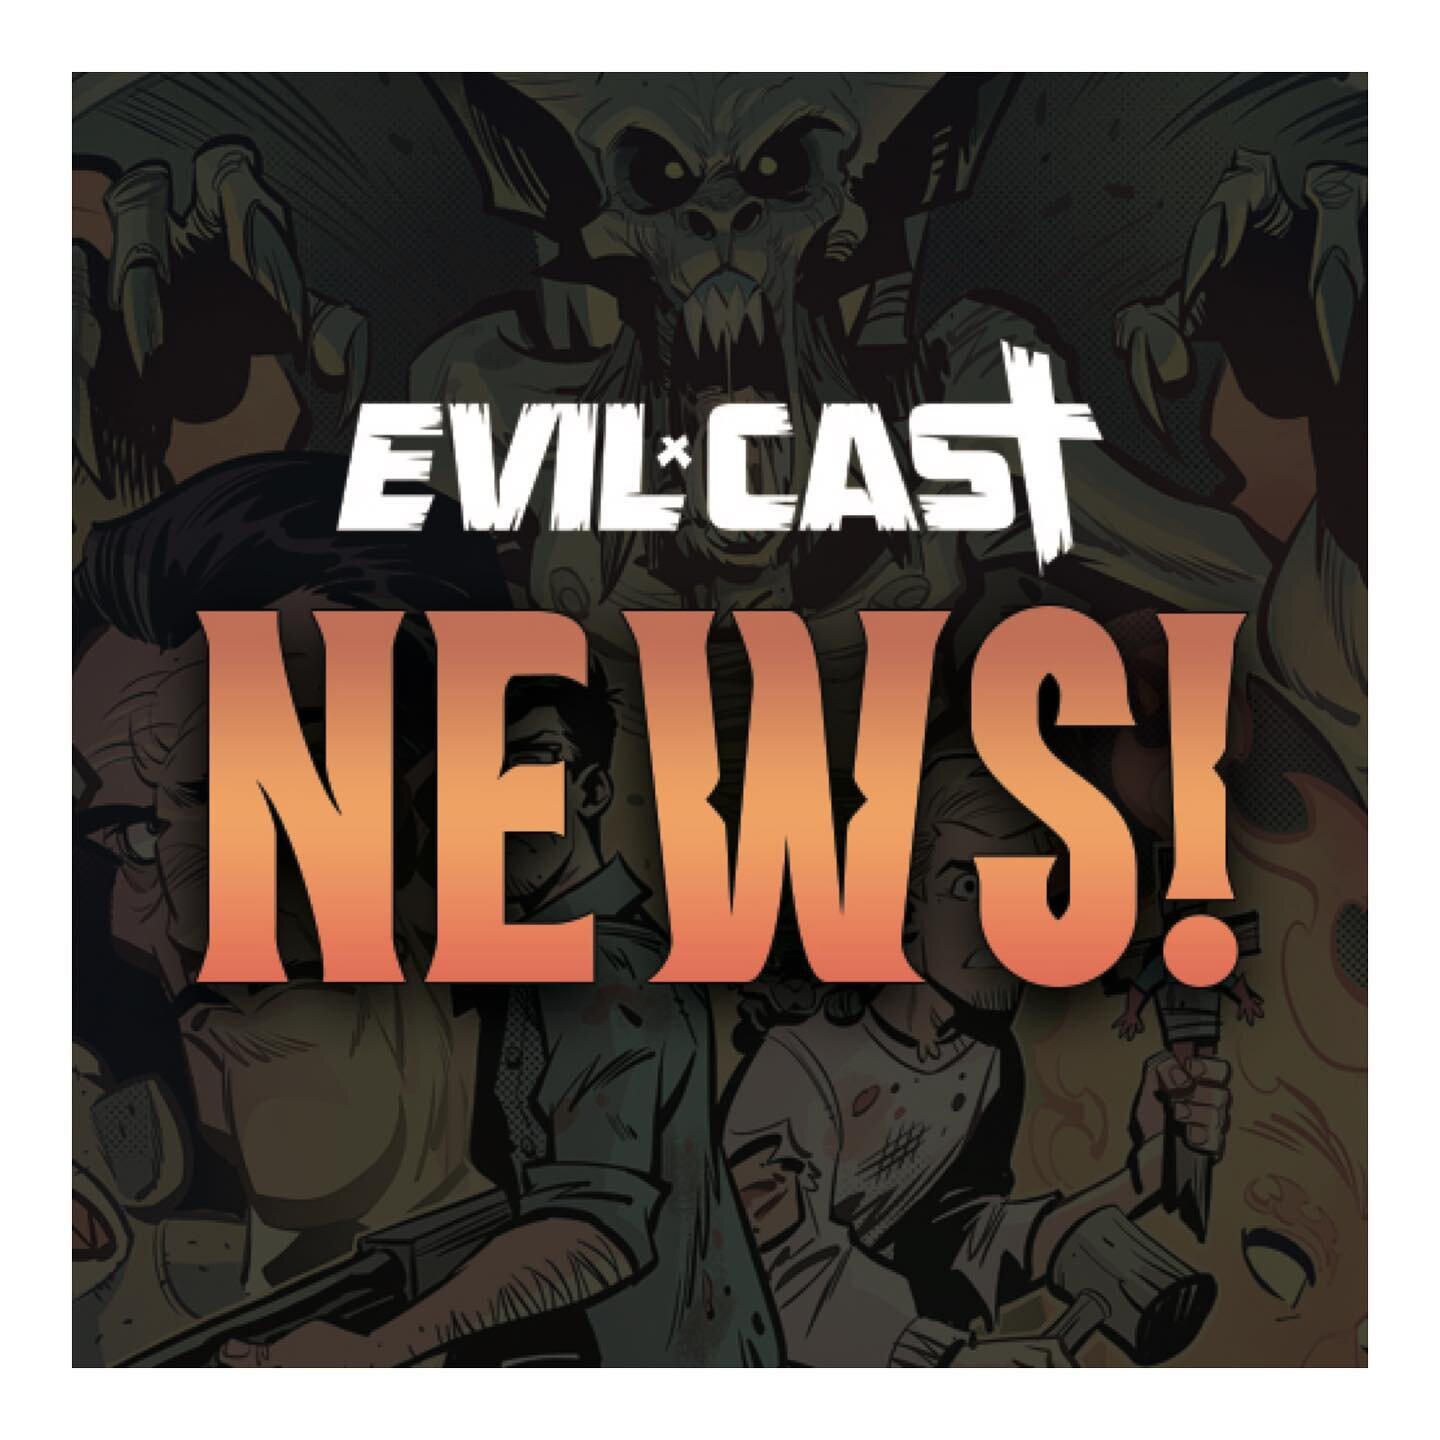 IMPORTANT PAPA NEWS: While some of you have known about this for a while, I am happy to officially announce that Noah&rsquo;s and my comic book EVIL CAST has been picked up for publication! We started this journey way back in 2018 (holy s***) and I&r